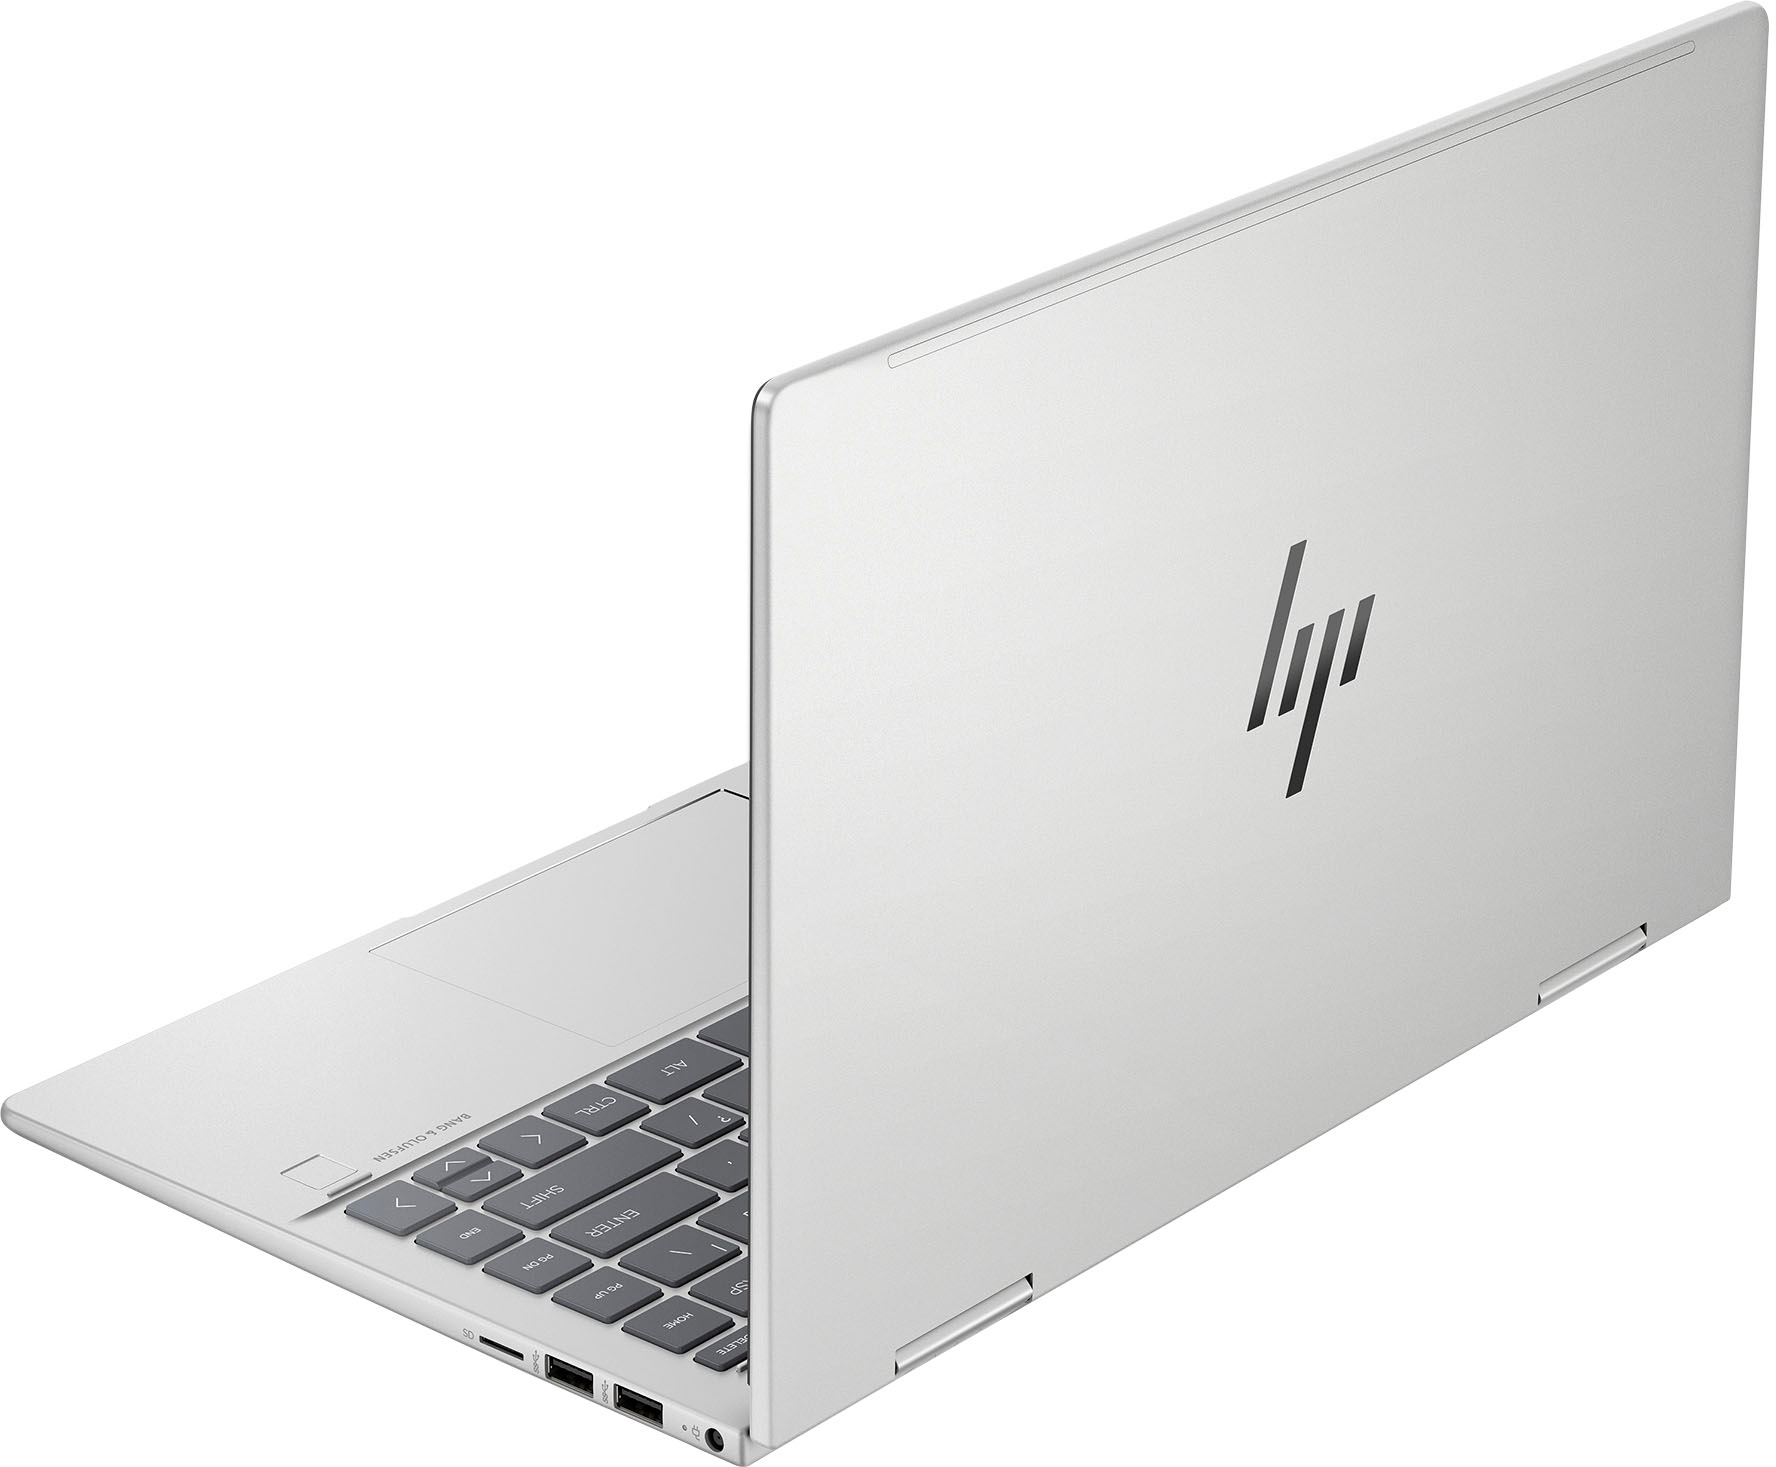 HP - ENVY 2-in-1 14" Full HD Touch-Screen Laptop - Intel Core i7 - 16GB Memory - 1TB SSD - Natural Silver